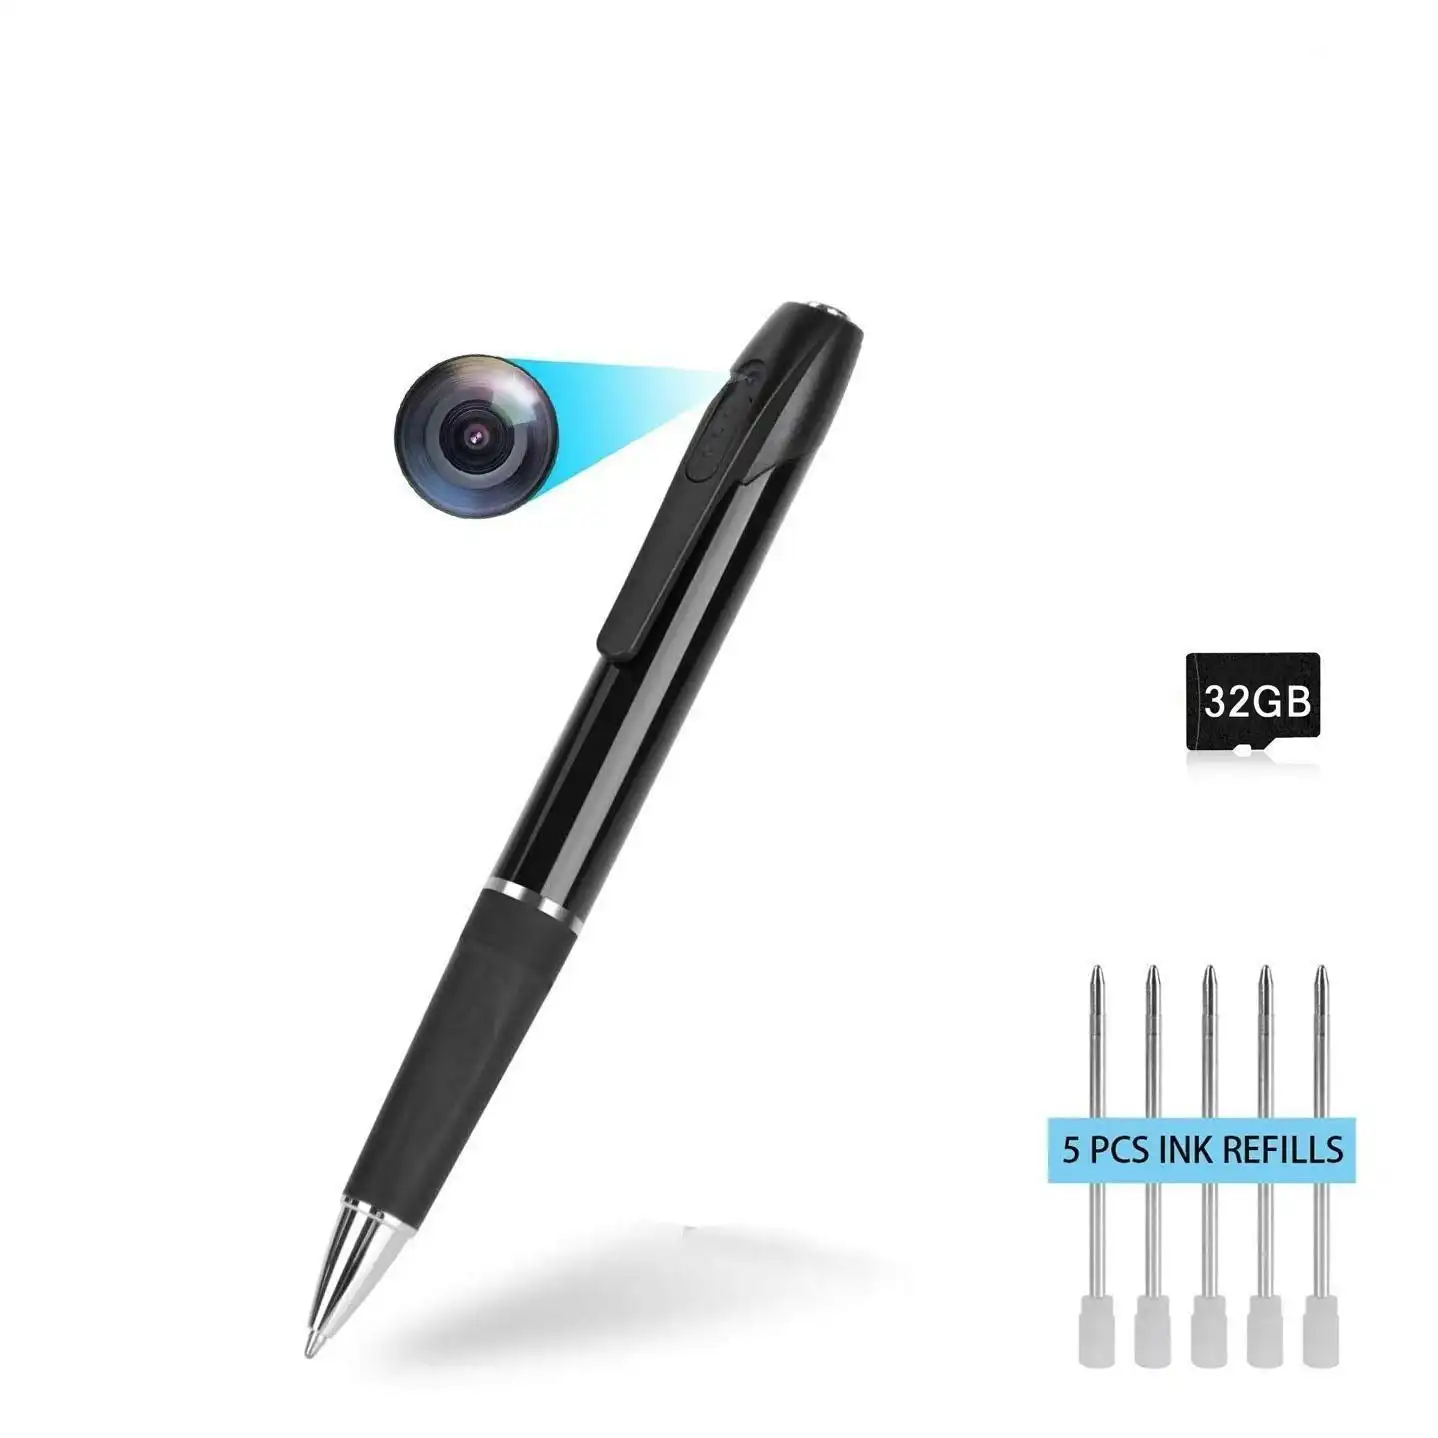 Hidden Camera - Spy Camera - Mini Spy Camera LKcare 1080p HD Spy Camera Pen 2.5 Hours Video Taking Battery Life with 32GB Memory for Business Conferen